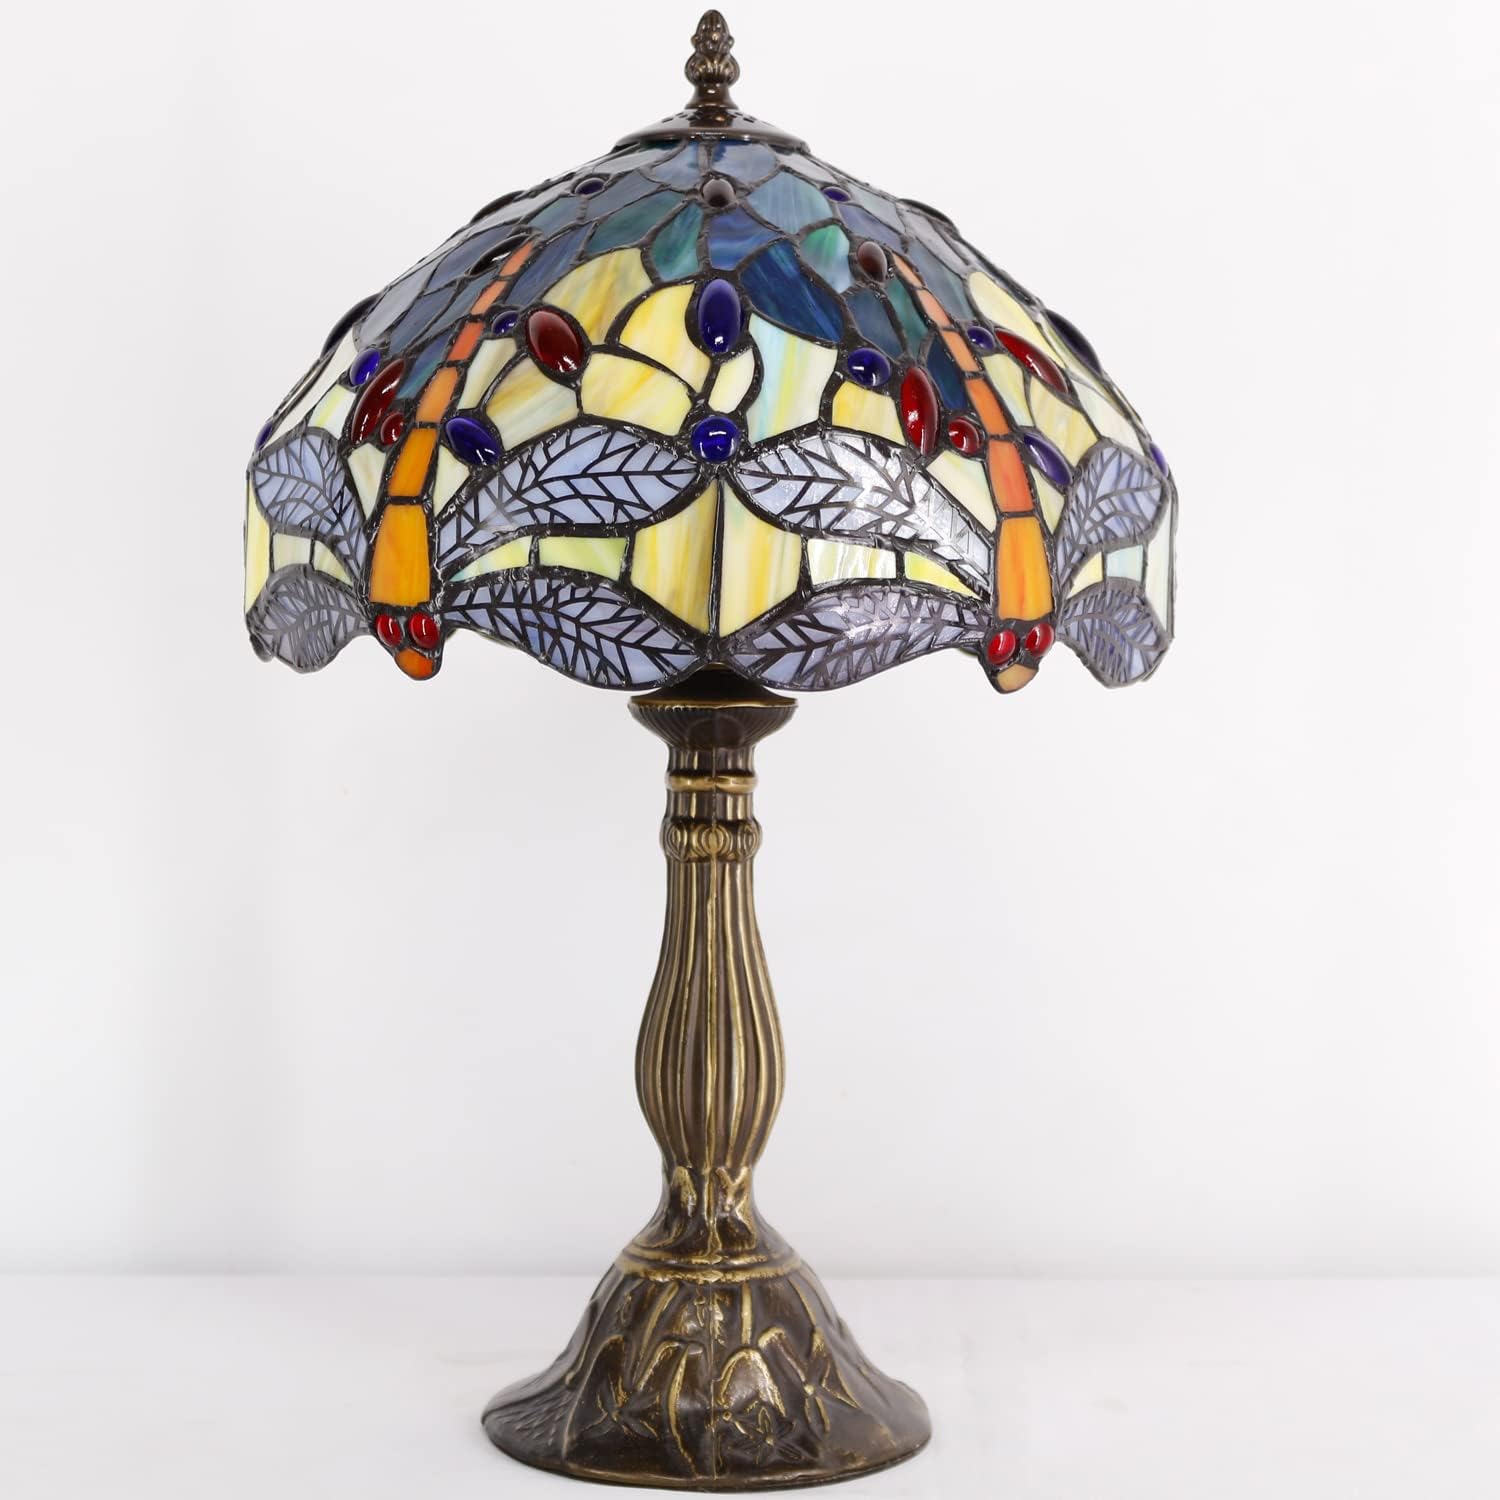 GEDUBIUBOO  Lamp Sea Blue Yellow Stained Glass Dragonfly Style Table Lamp Nautical Reading Desk Bedside Light 12X12X18 Inches Decor Bedroom Living Room  Office S128 Series